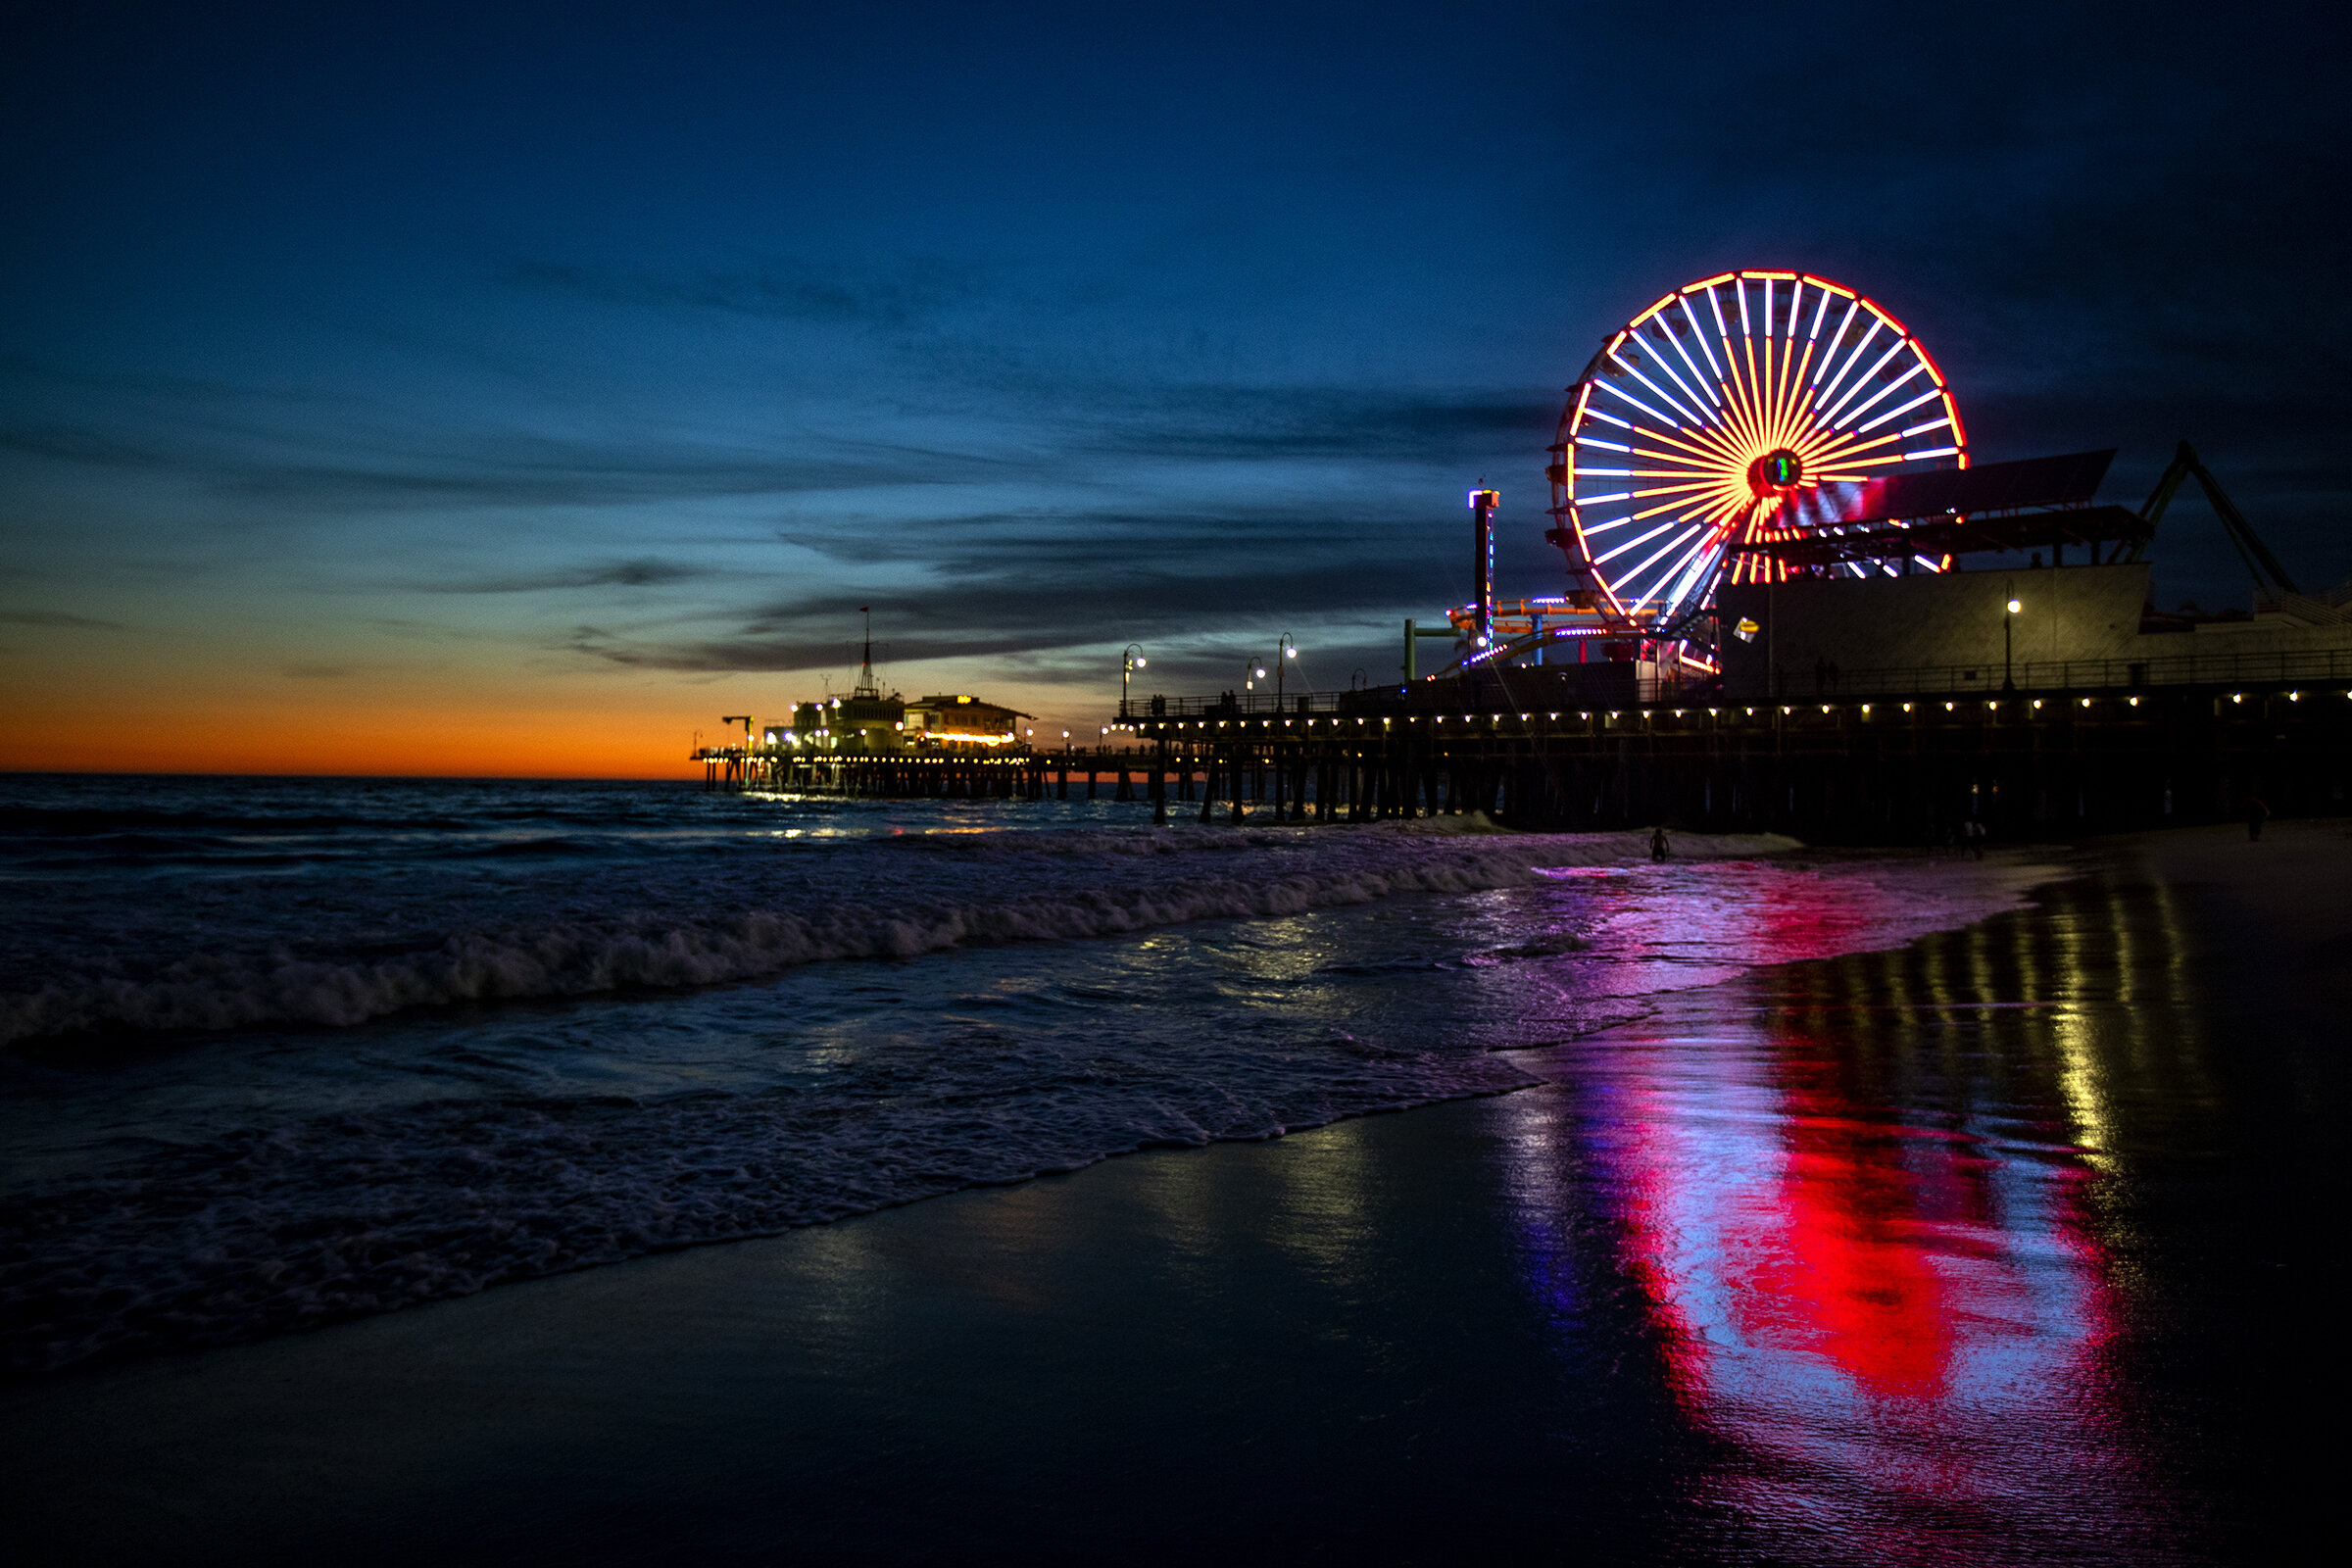  The ferris wheel at the pier at Pacific Park in Santa Monica is one of several landmarks around the greater Los Angles area that is lit up red for Red Cross Month in March.  